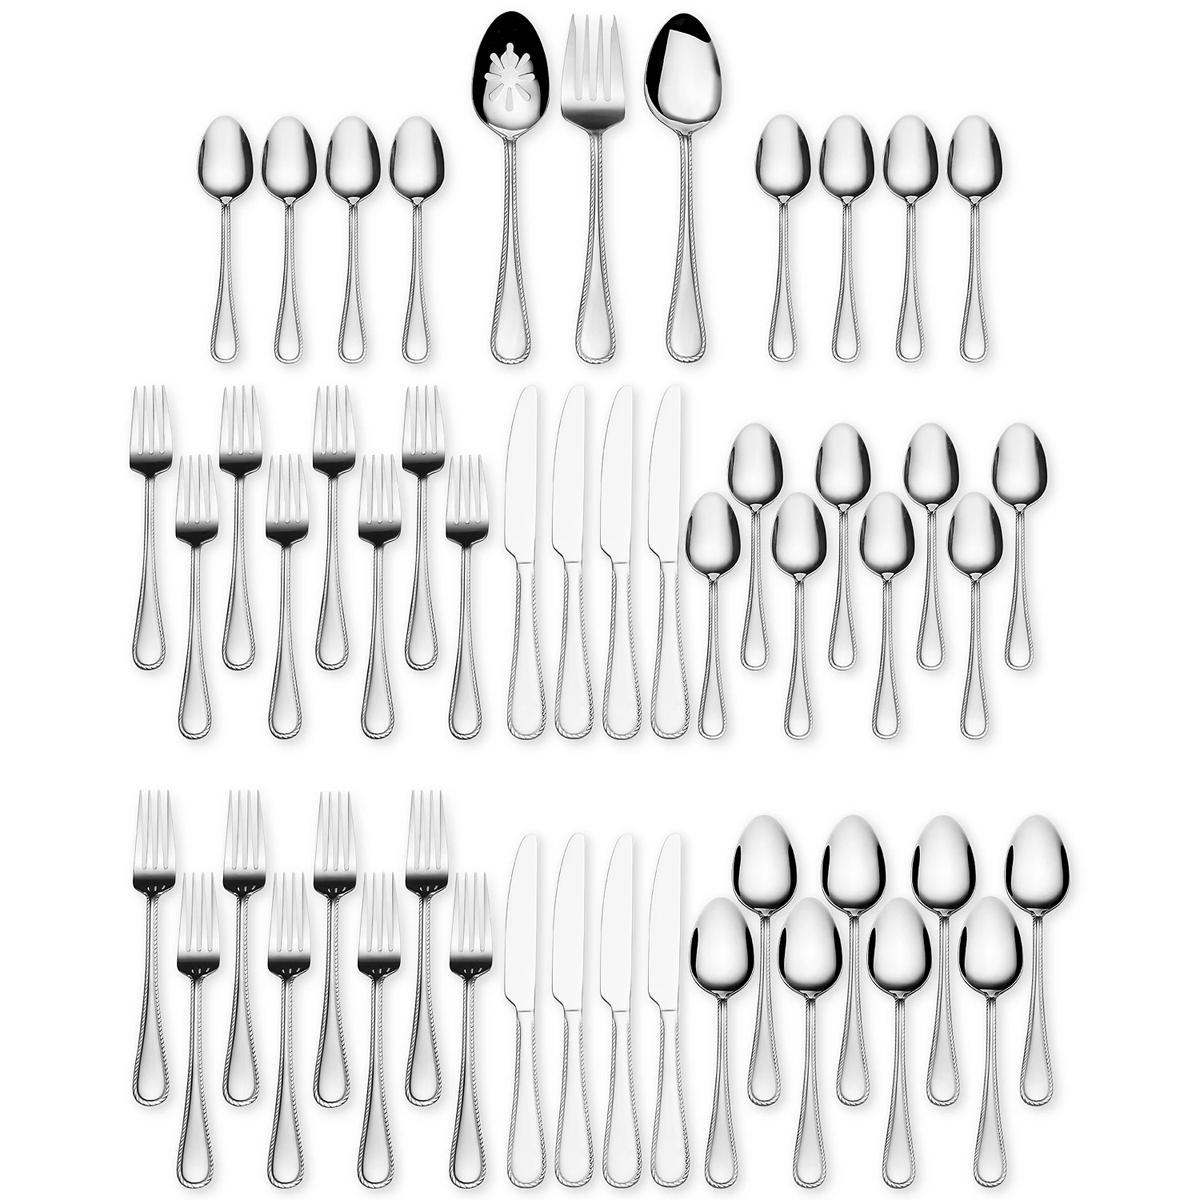 51-Piece International Silver Stainless Steel Flatware Sets for $39.99 Shipped